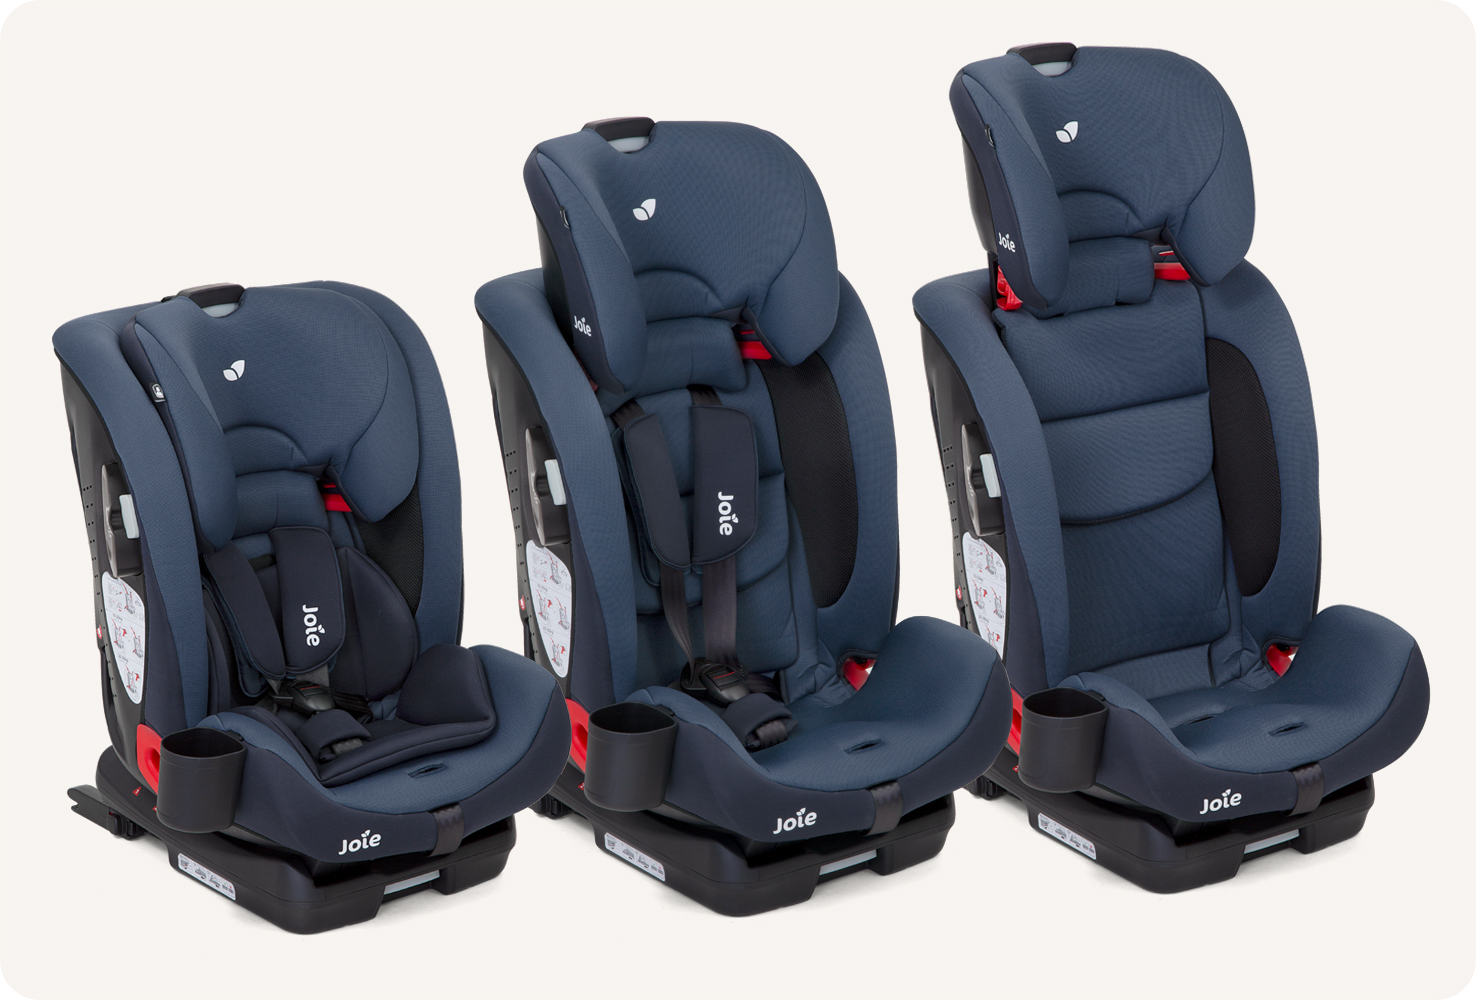 Three empty, dark blue Joie bold toddler car seats side-by-side showing the headrest at different height adjustments.